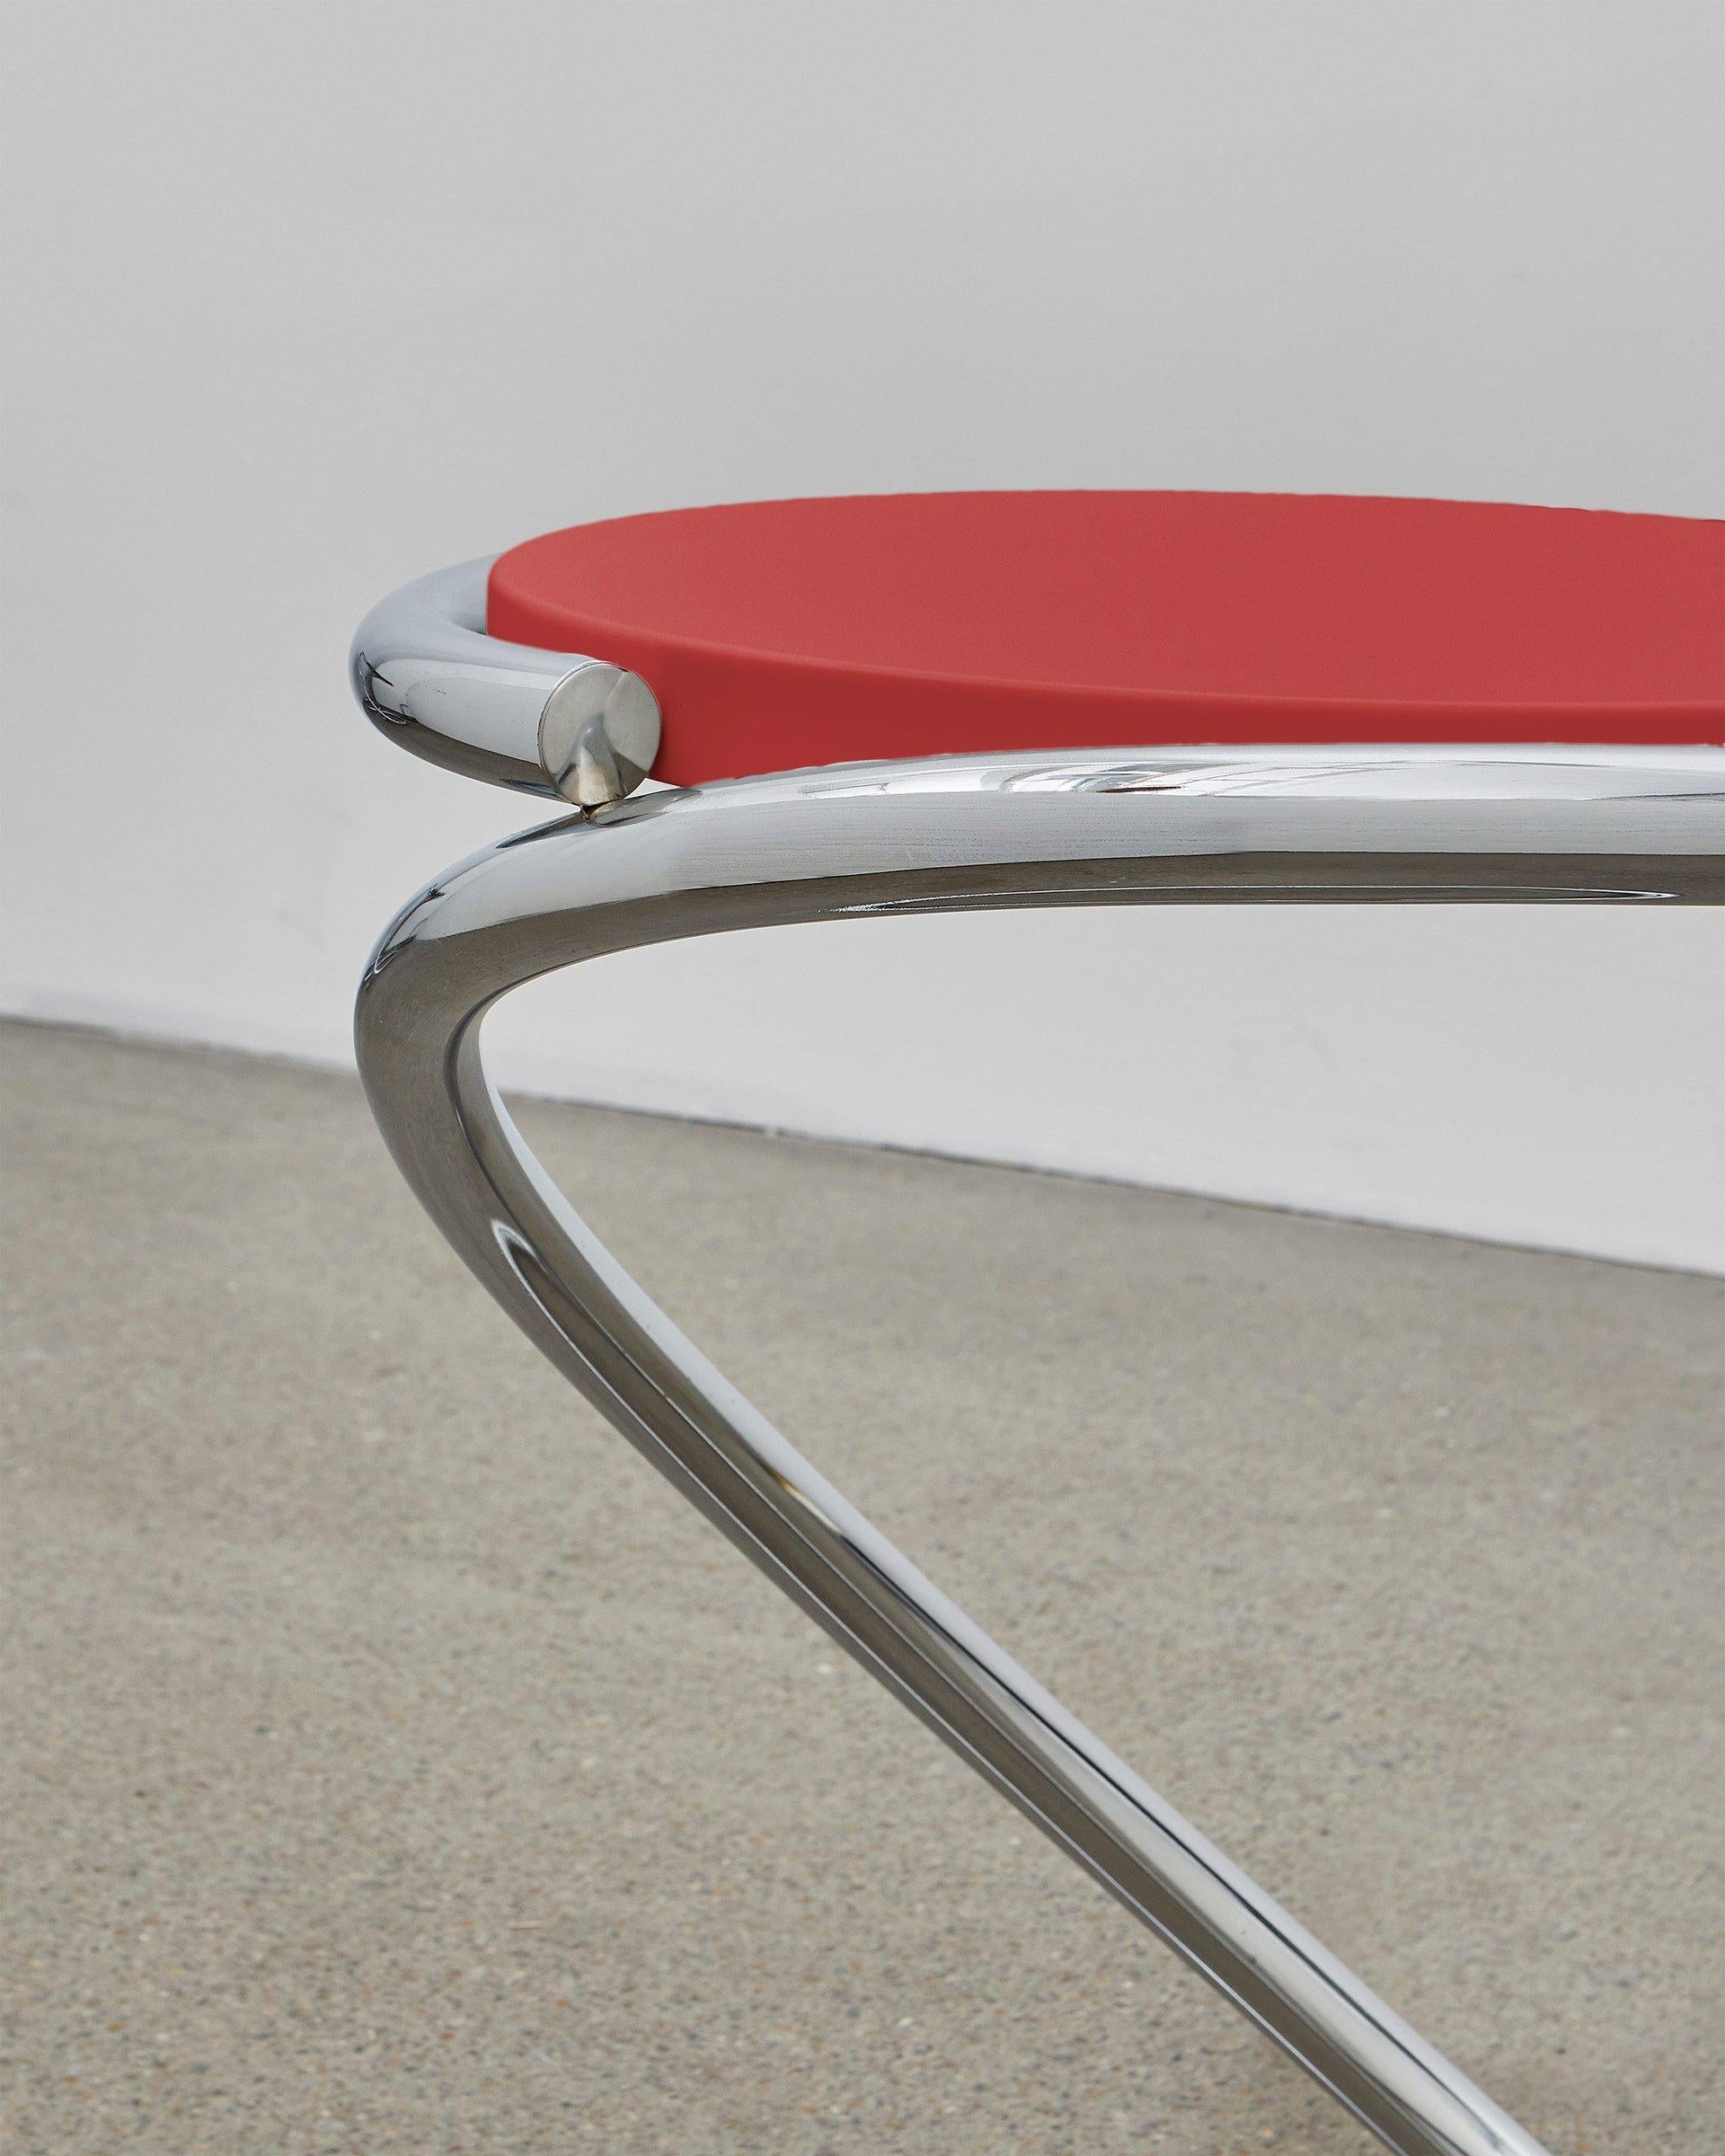 The PH snake stool is completely true to the original design and the use of chromed steel tubes, however updated for the 21st century to be available with wood seating in five colorways to coordinate with the ever-popular Poul Henningsen lighting